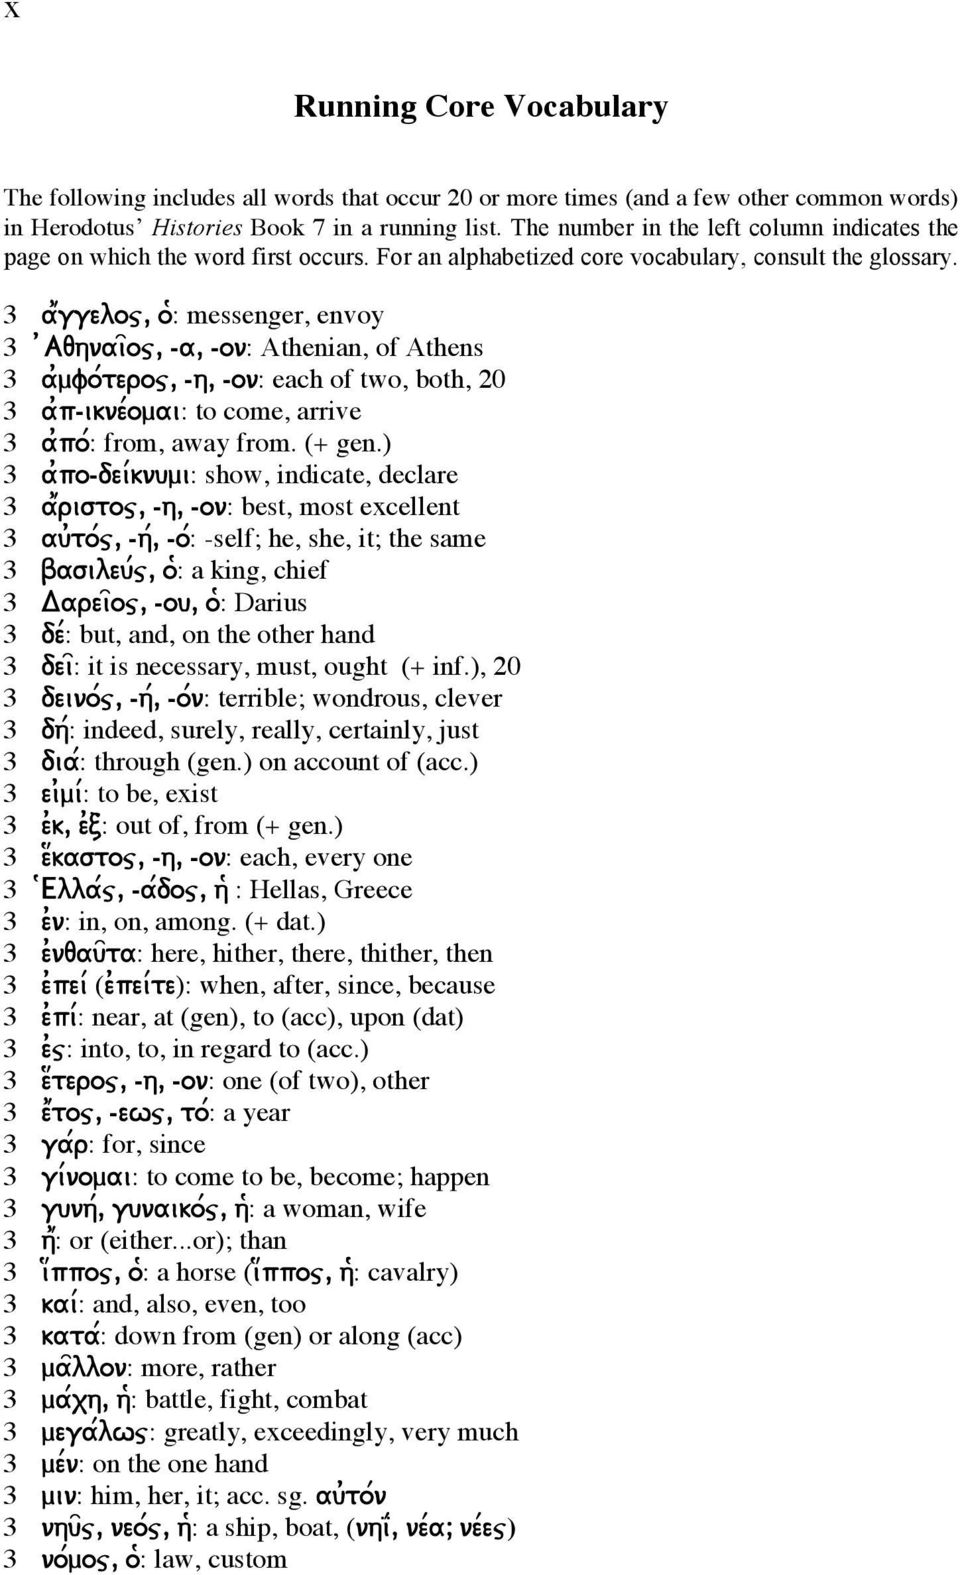 3 a1ggeloj, o9: messenger, envoy 3 0Aqhnai=oj, -a, -on: Athenian, of Athens 3 a0mfo/teroj, -h, -on: each of two, both, 0 3 a0p-ikne/omai: to come, arrive 3 a0po/: from, away from. (+ gen.